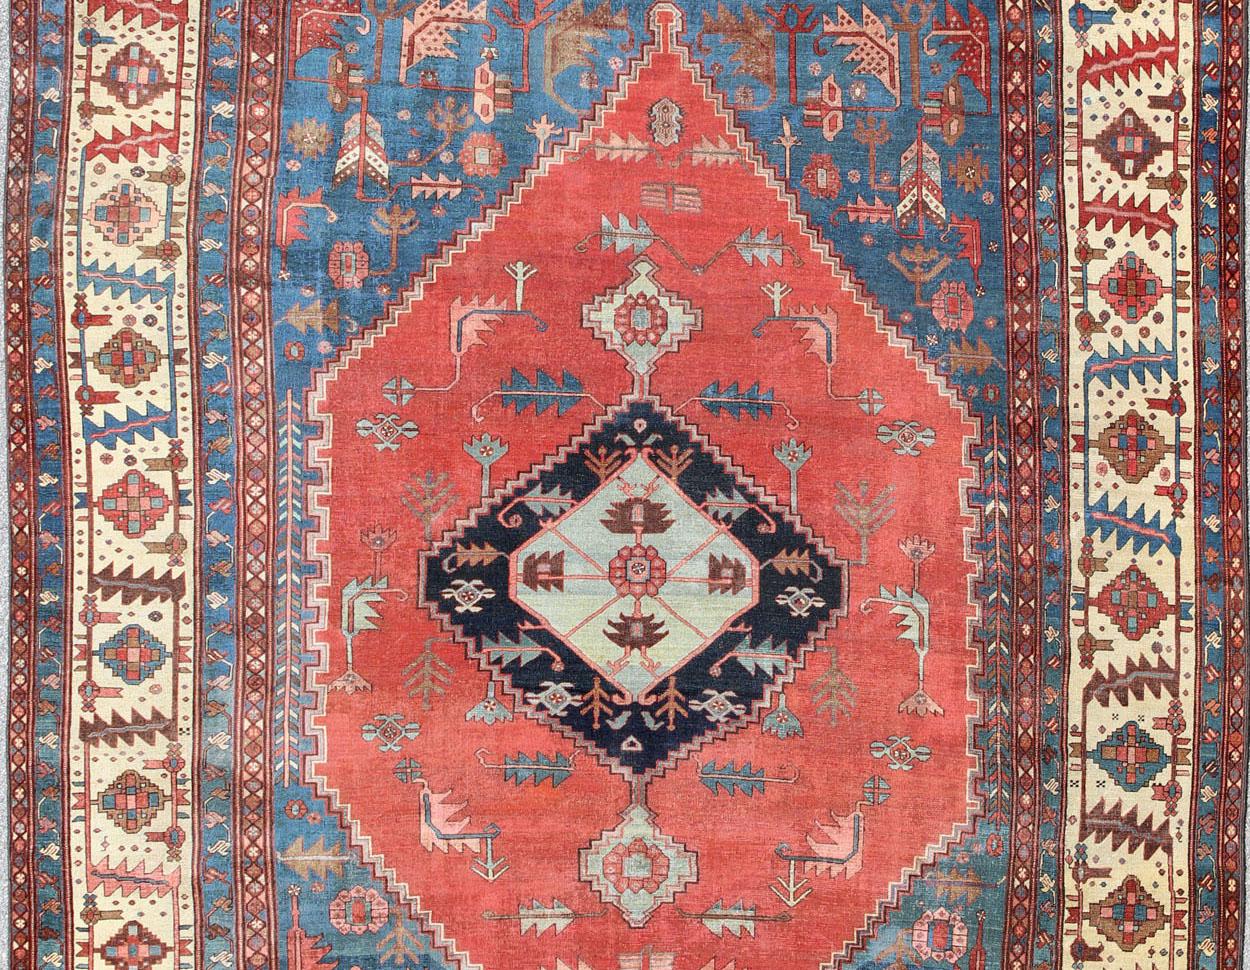 Antique Persian Large Bakshaish Serapi Rug in Brick Red, Royal Blue and Ivory For Sale 2